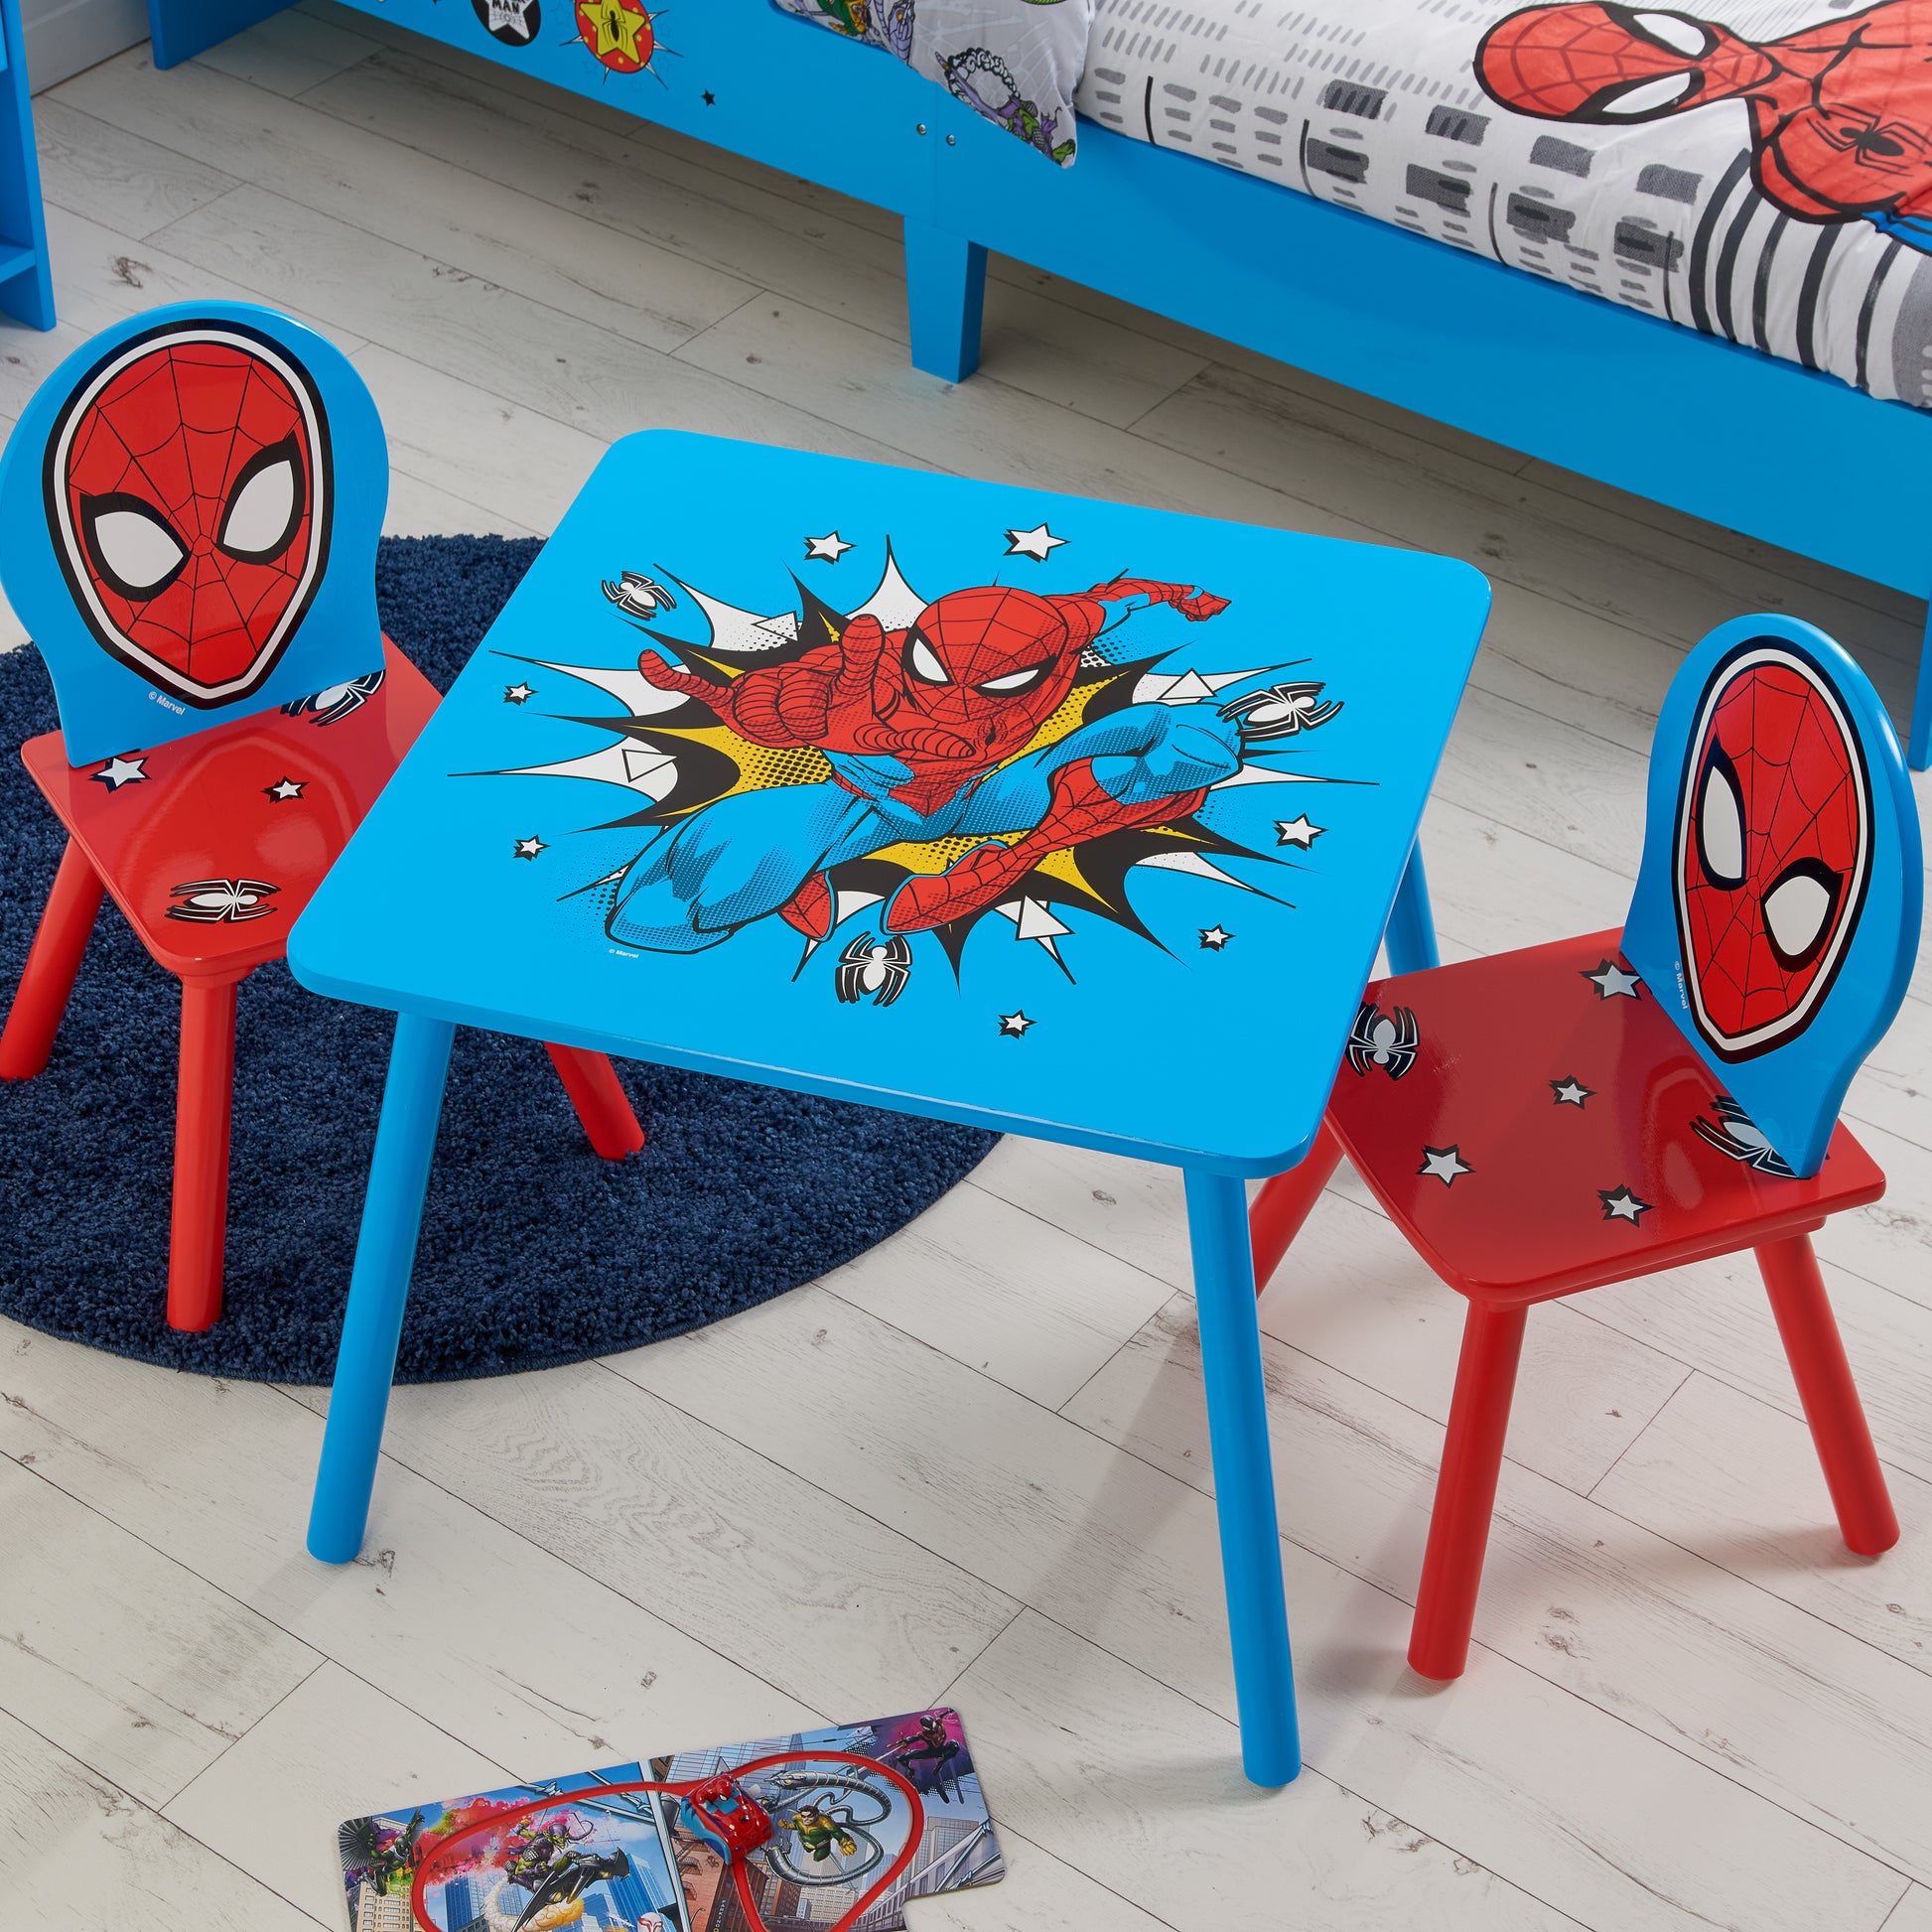 Disney Home - Spider-man Table & Chairs - Kidsly